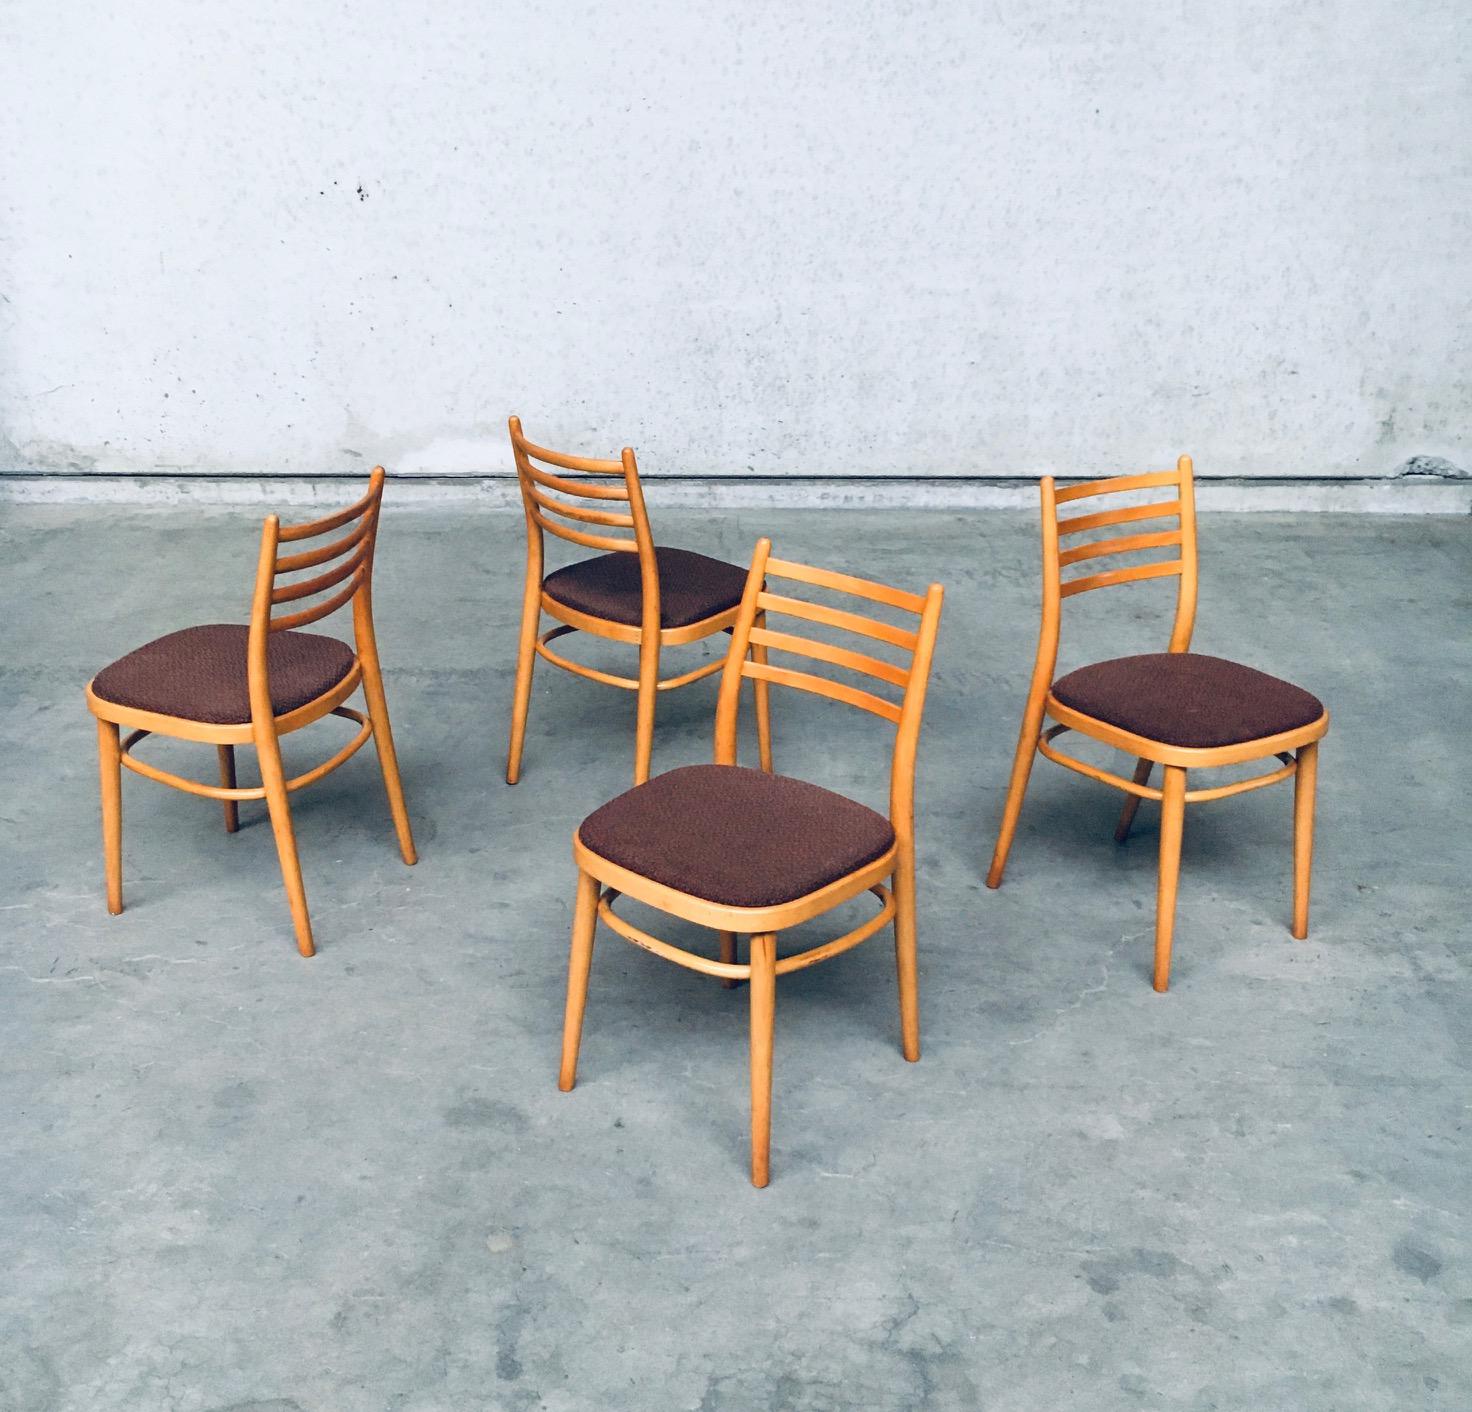 Mid-20th Century Mid-Century Modern Design Dining Chair Set by Ton, 1968, Czechoslovakia For Sale